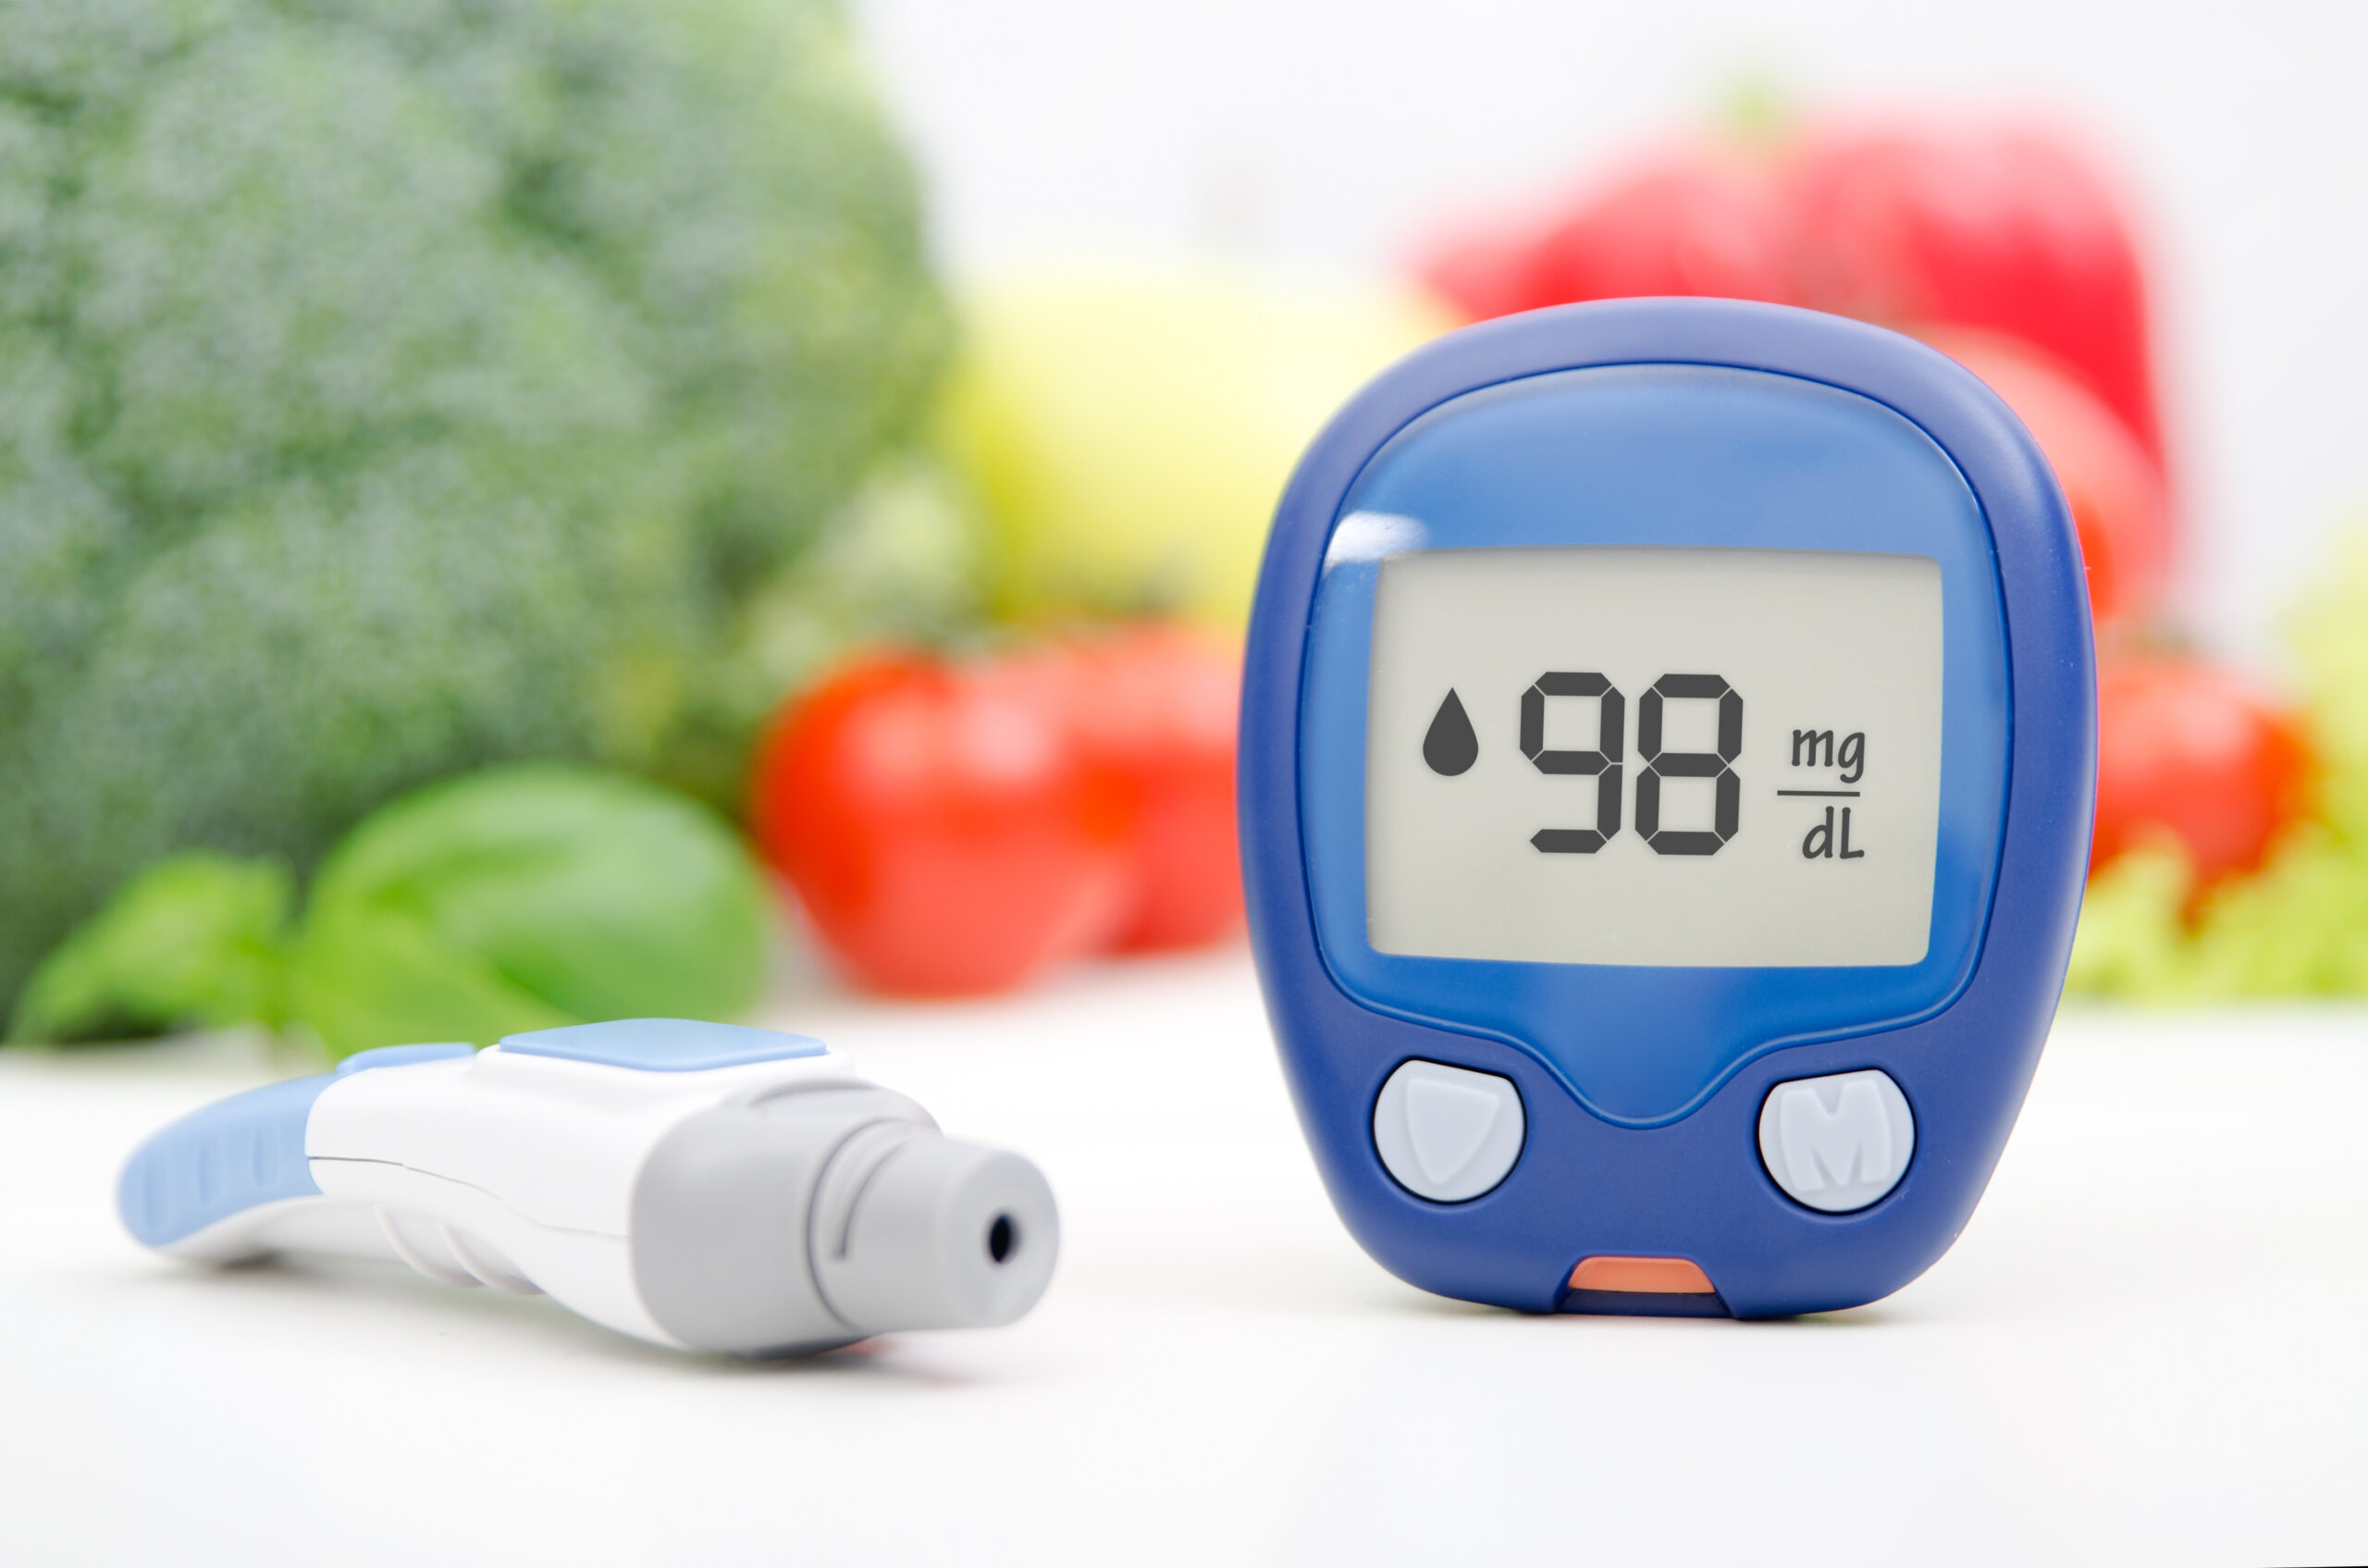 In The News: Concerning Diabetes